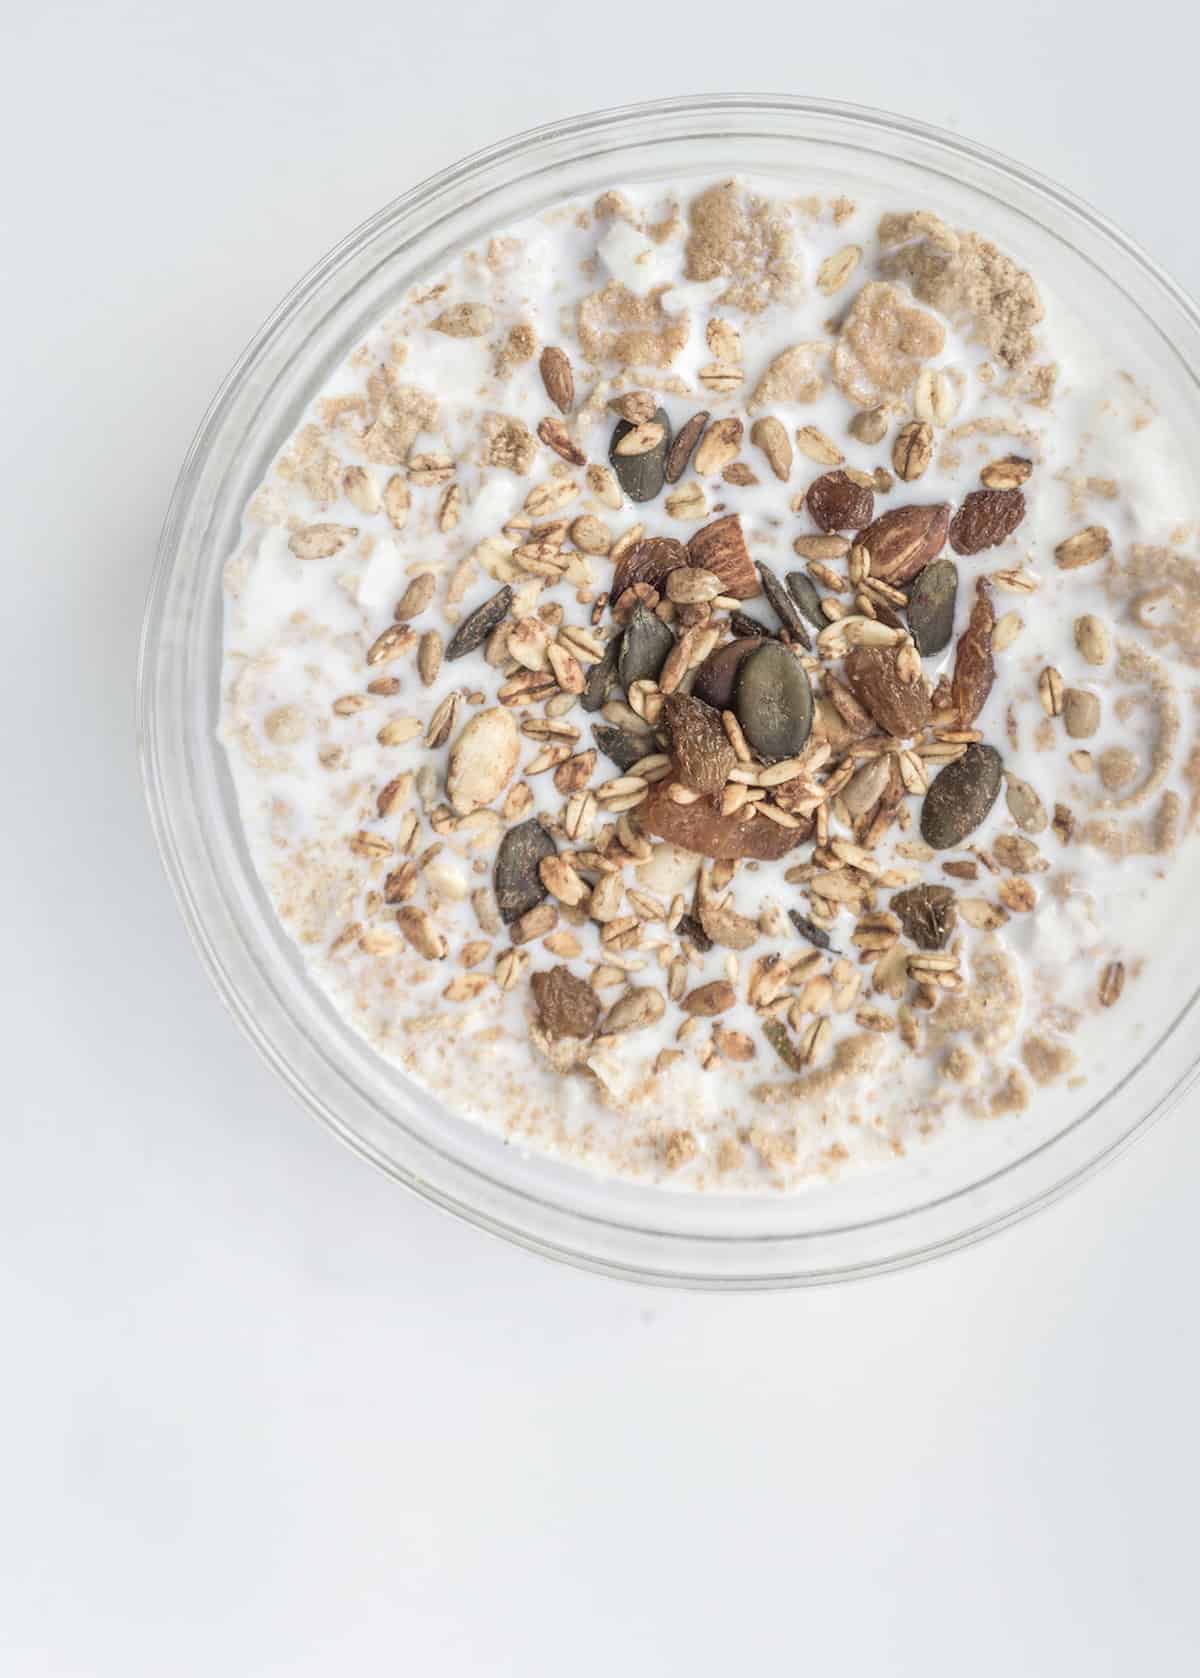 which oats are the healthiest? #healthyeating #oatmeal #oats #vegan #steelcutoats #overnightoats